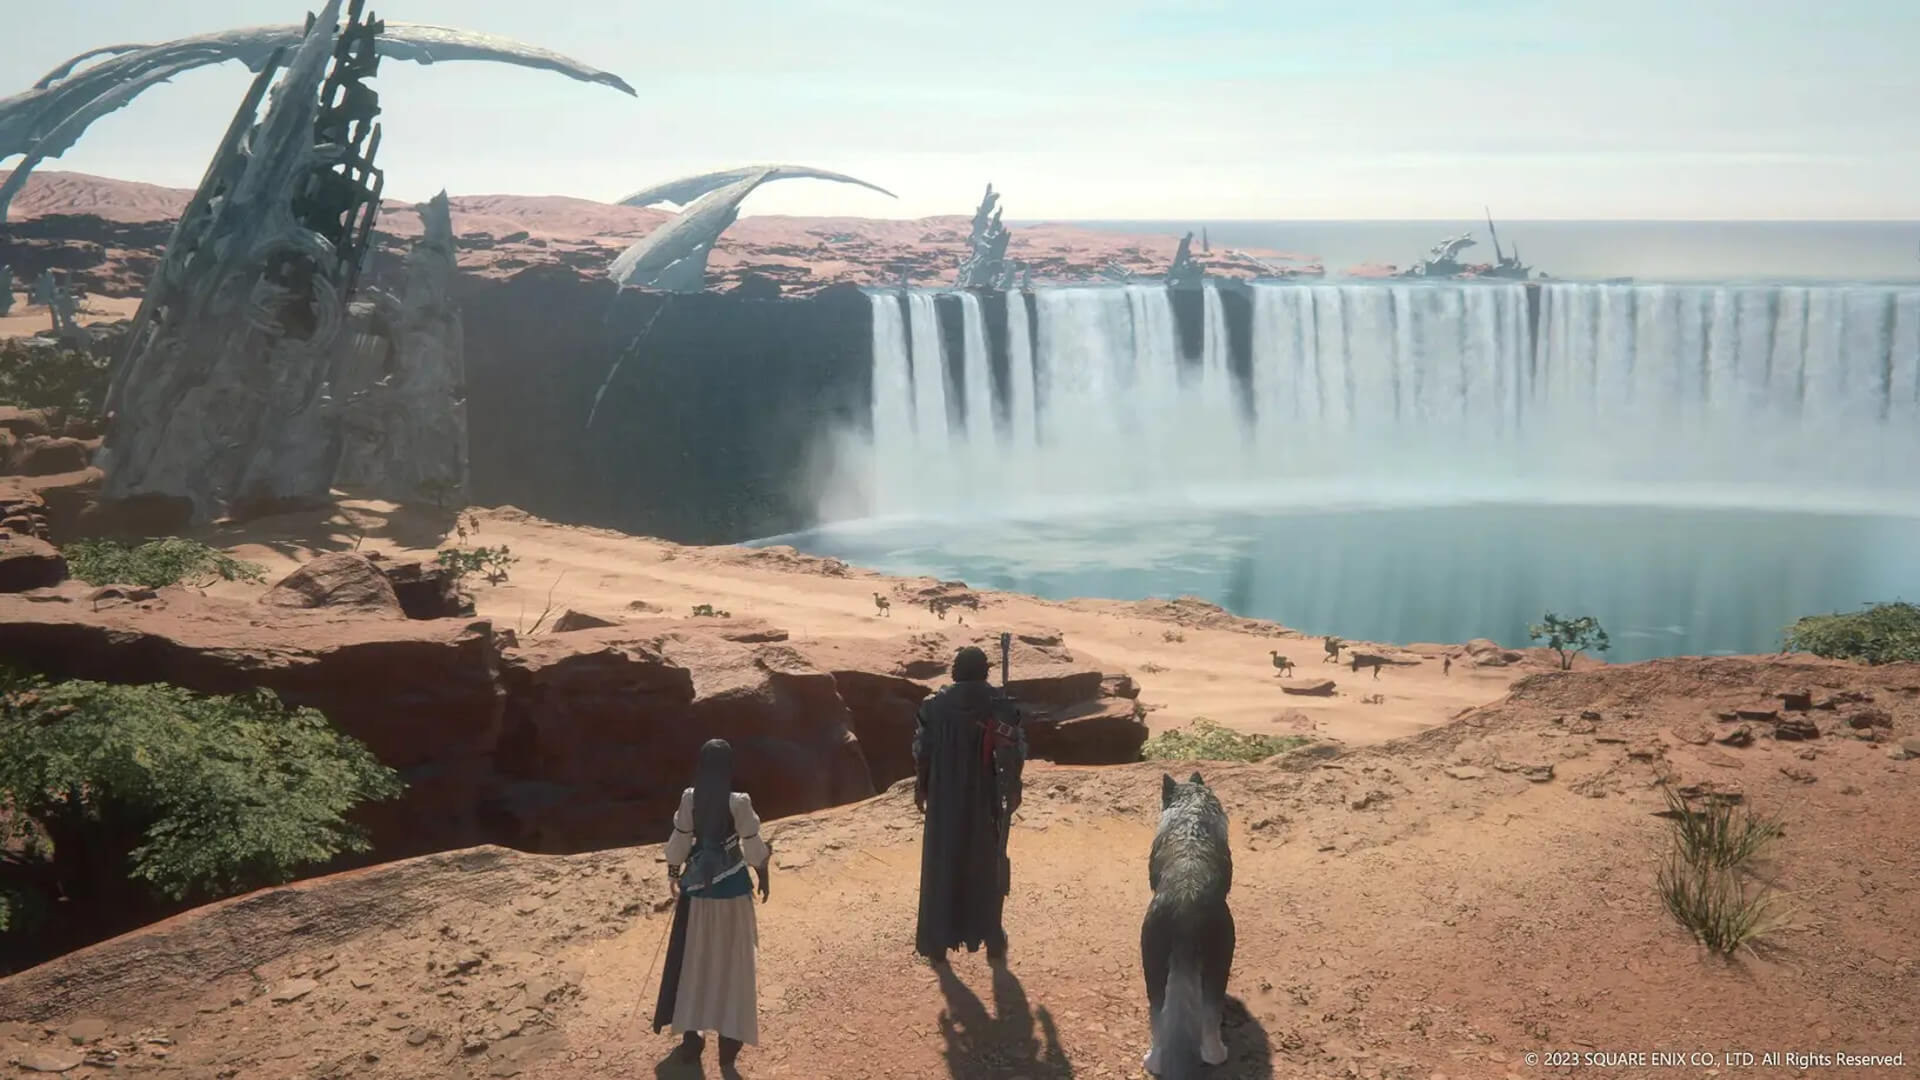 Clive and his friends standing in front of a massive waterfall vista in Final Fantasy XVI